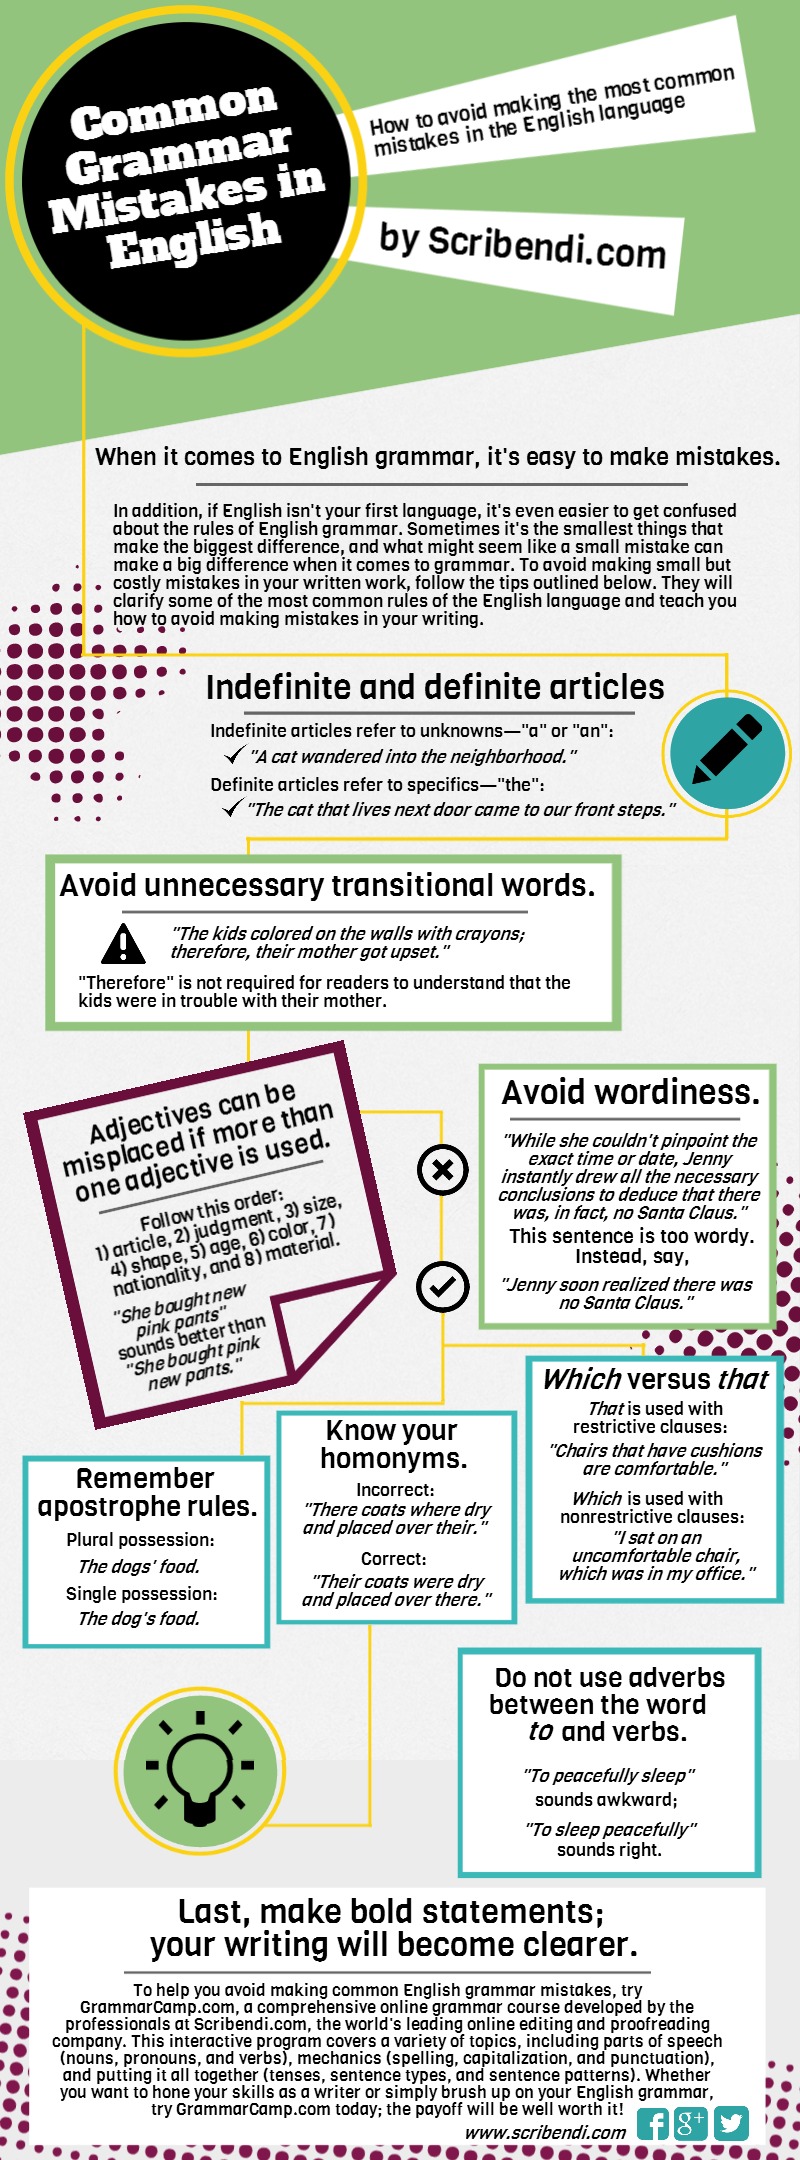 Scribendi.com's infographic about common grammar mistakes in English.